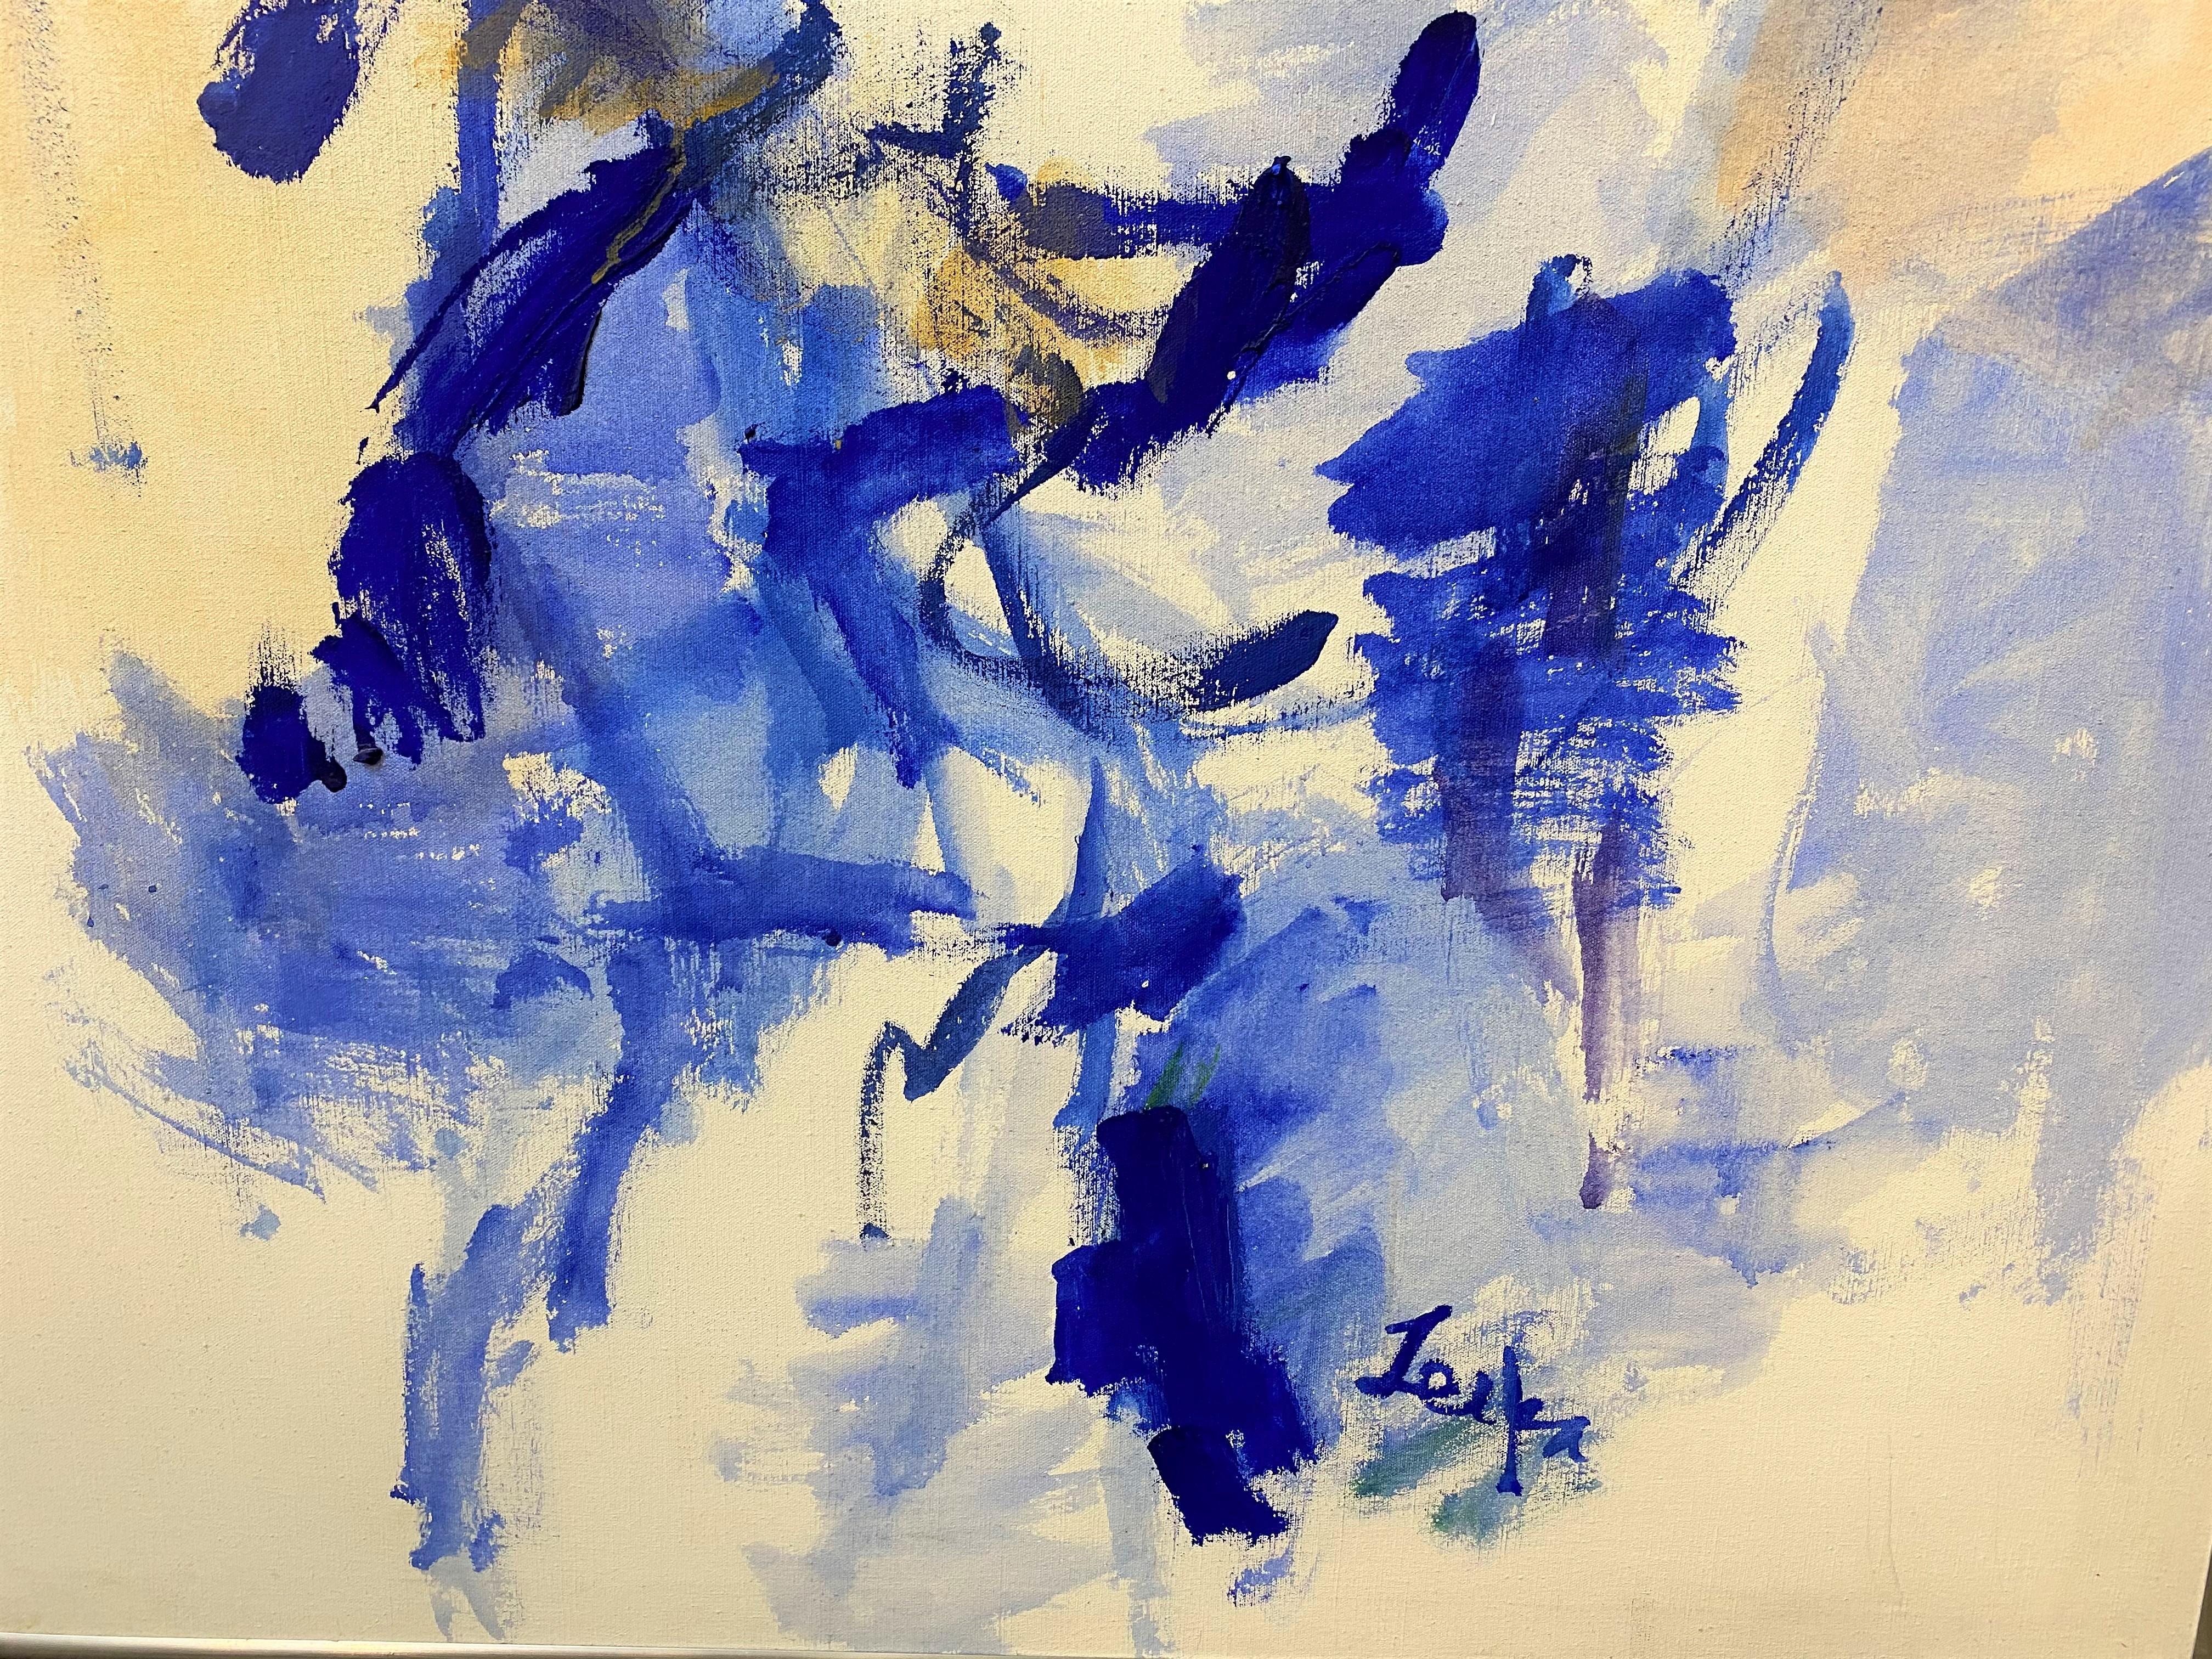 A fine abstract oil painting on canvas in blues and yellows, illegibly signed lower right, and housed in a simple modern chrome frame. Probably dates to the 1970’s. Dimensions: 47 in H x 35 in W, actual; 48.25 in H  x 36 in W, framed. Ref: 164